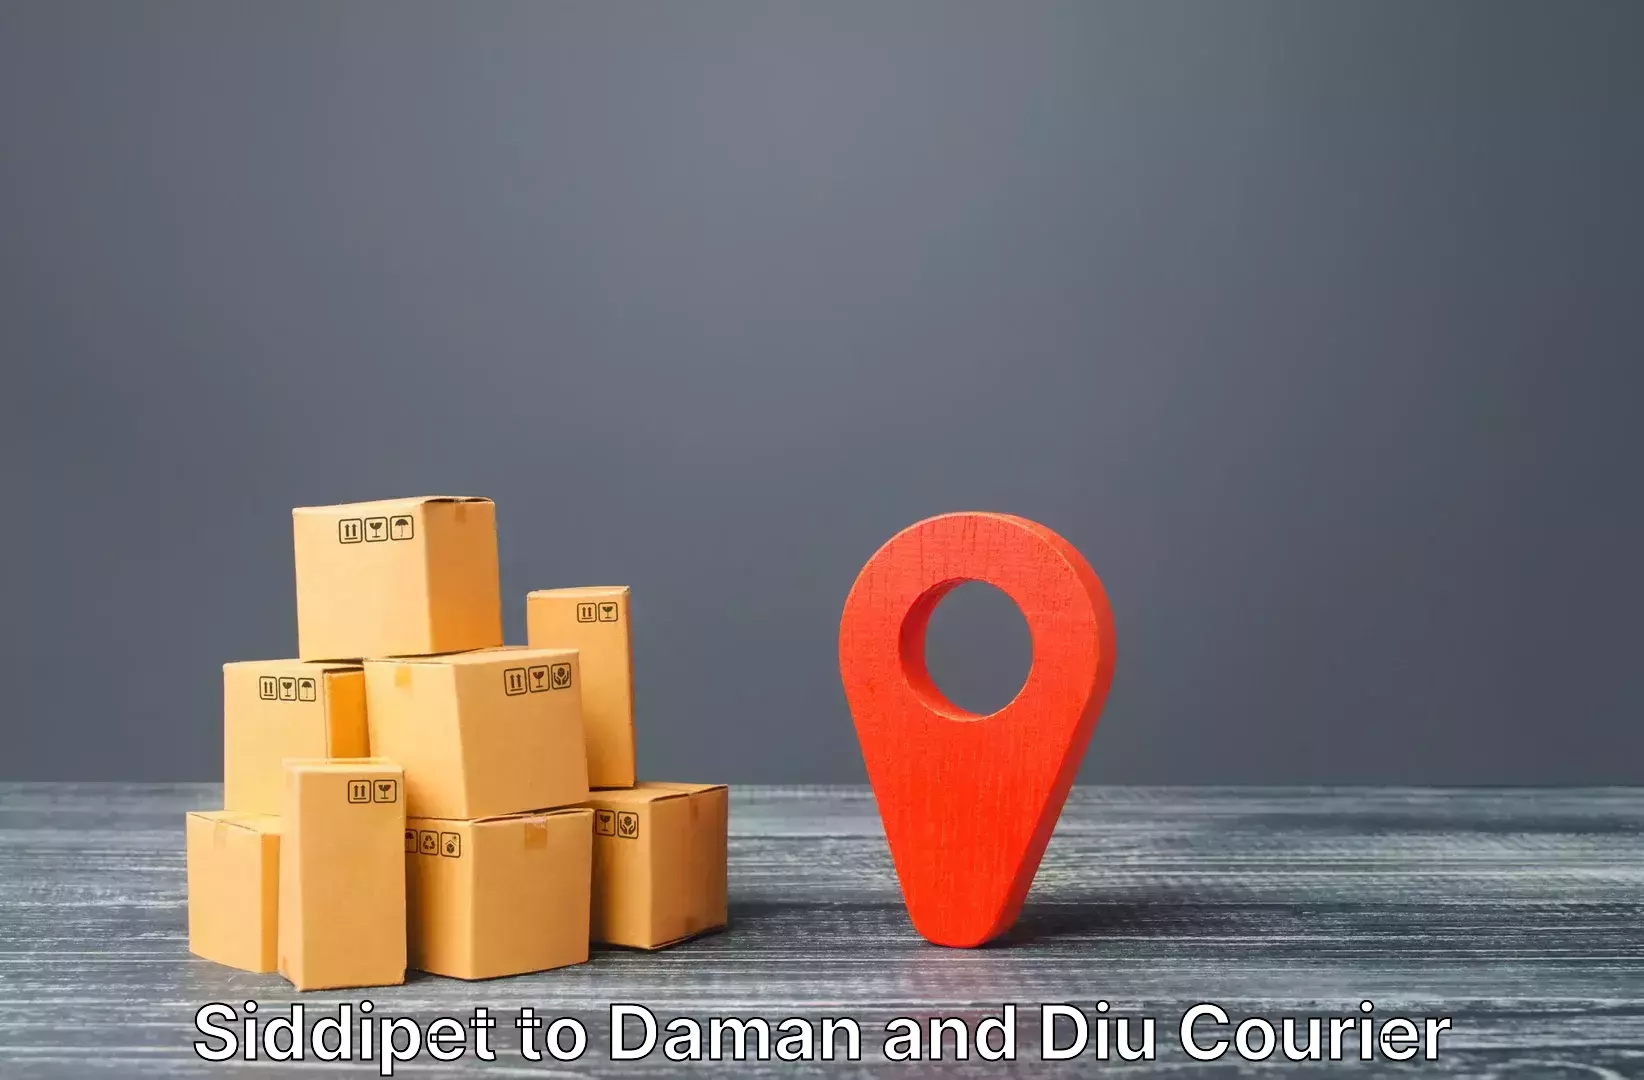 Hassle-free luggage shipping Siddipet to Daman